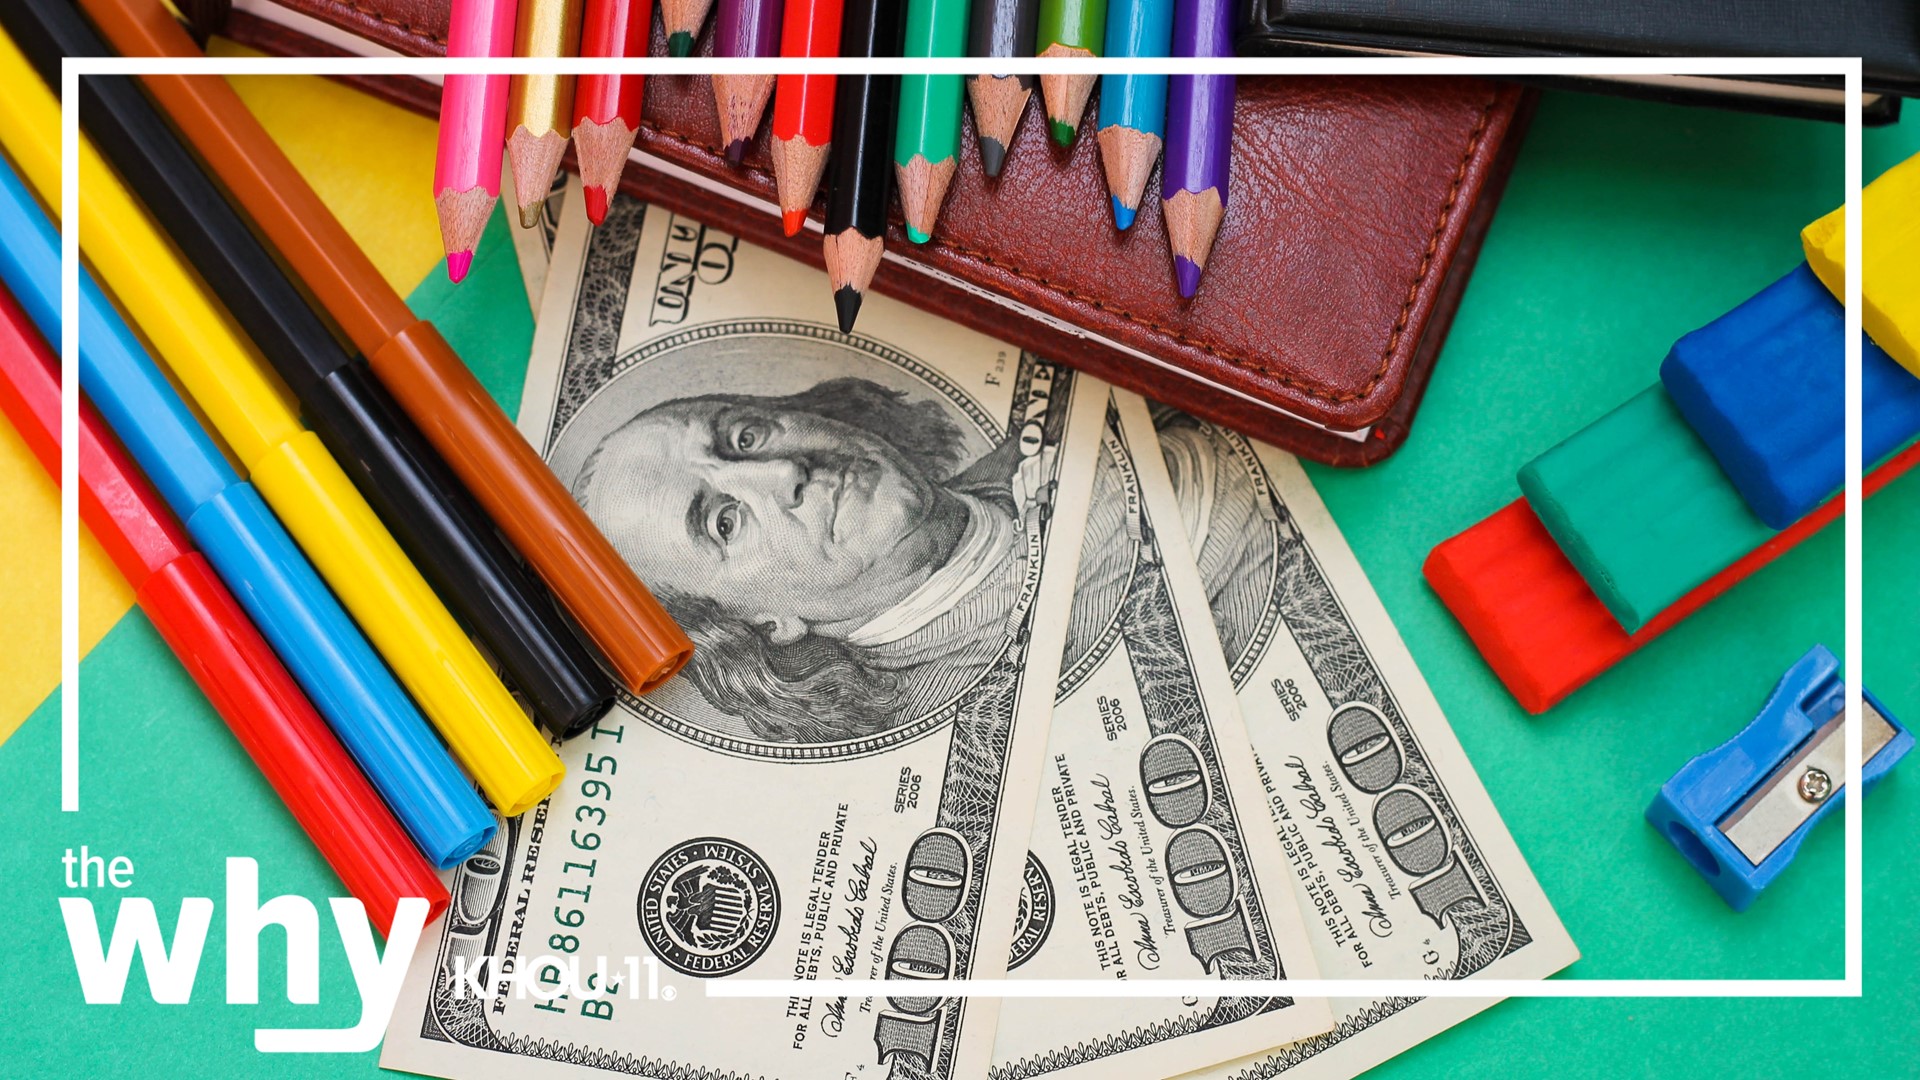 Starting this Friday, you can buy certain school supplies in Texas tax free if they are less than $100.